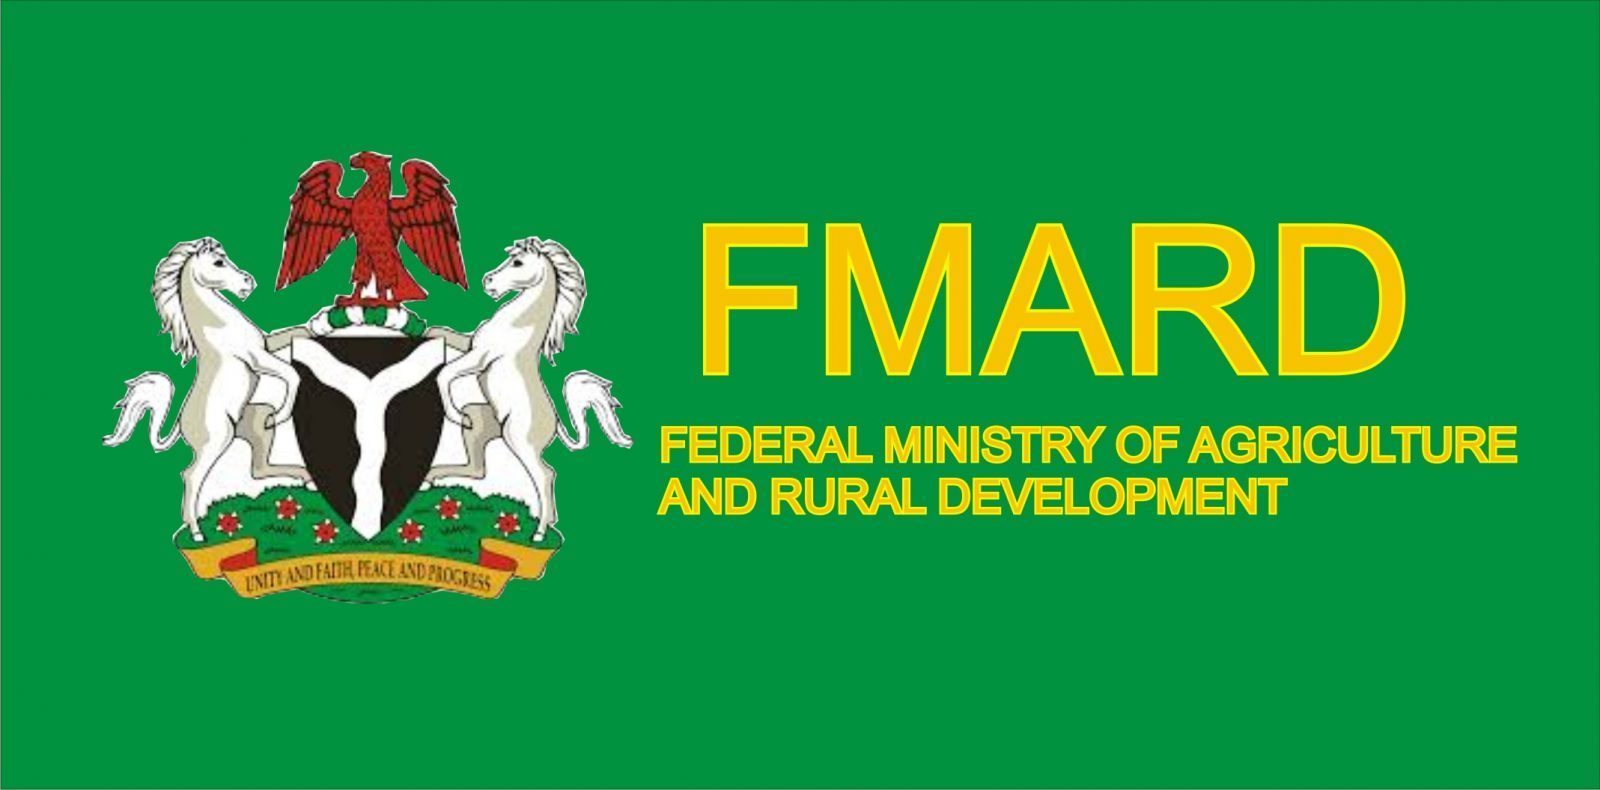 The Federal Ministry of Agriculture and Rural Development